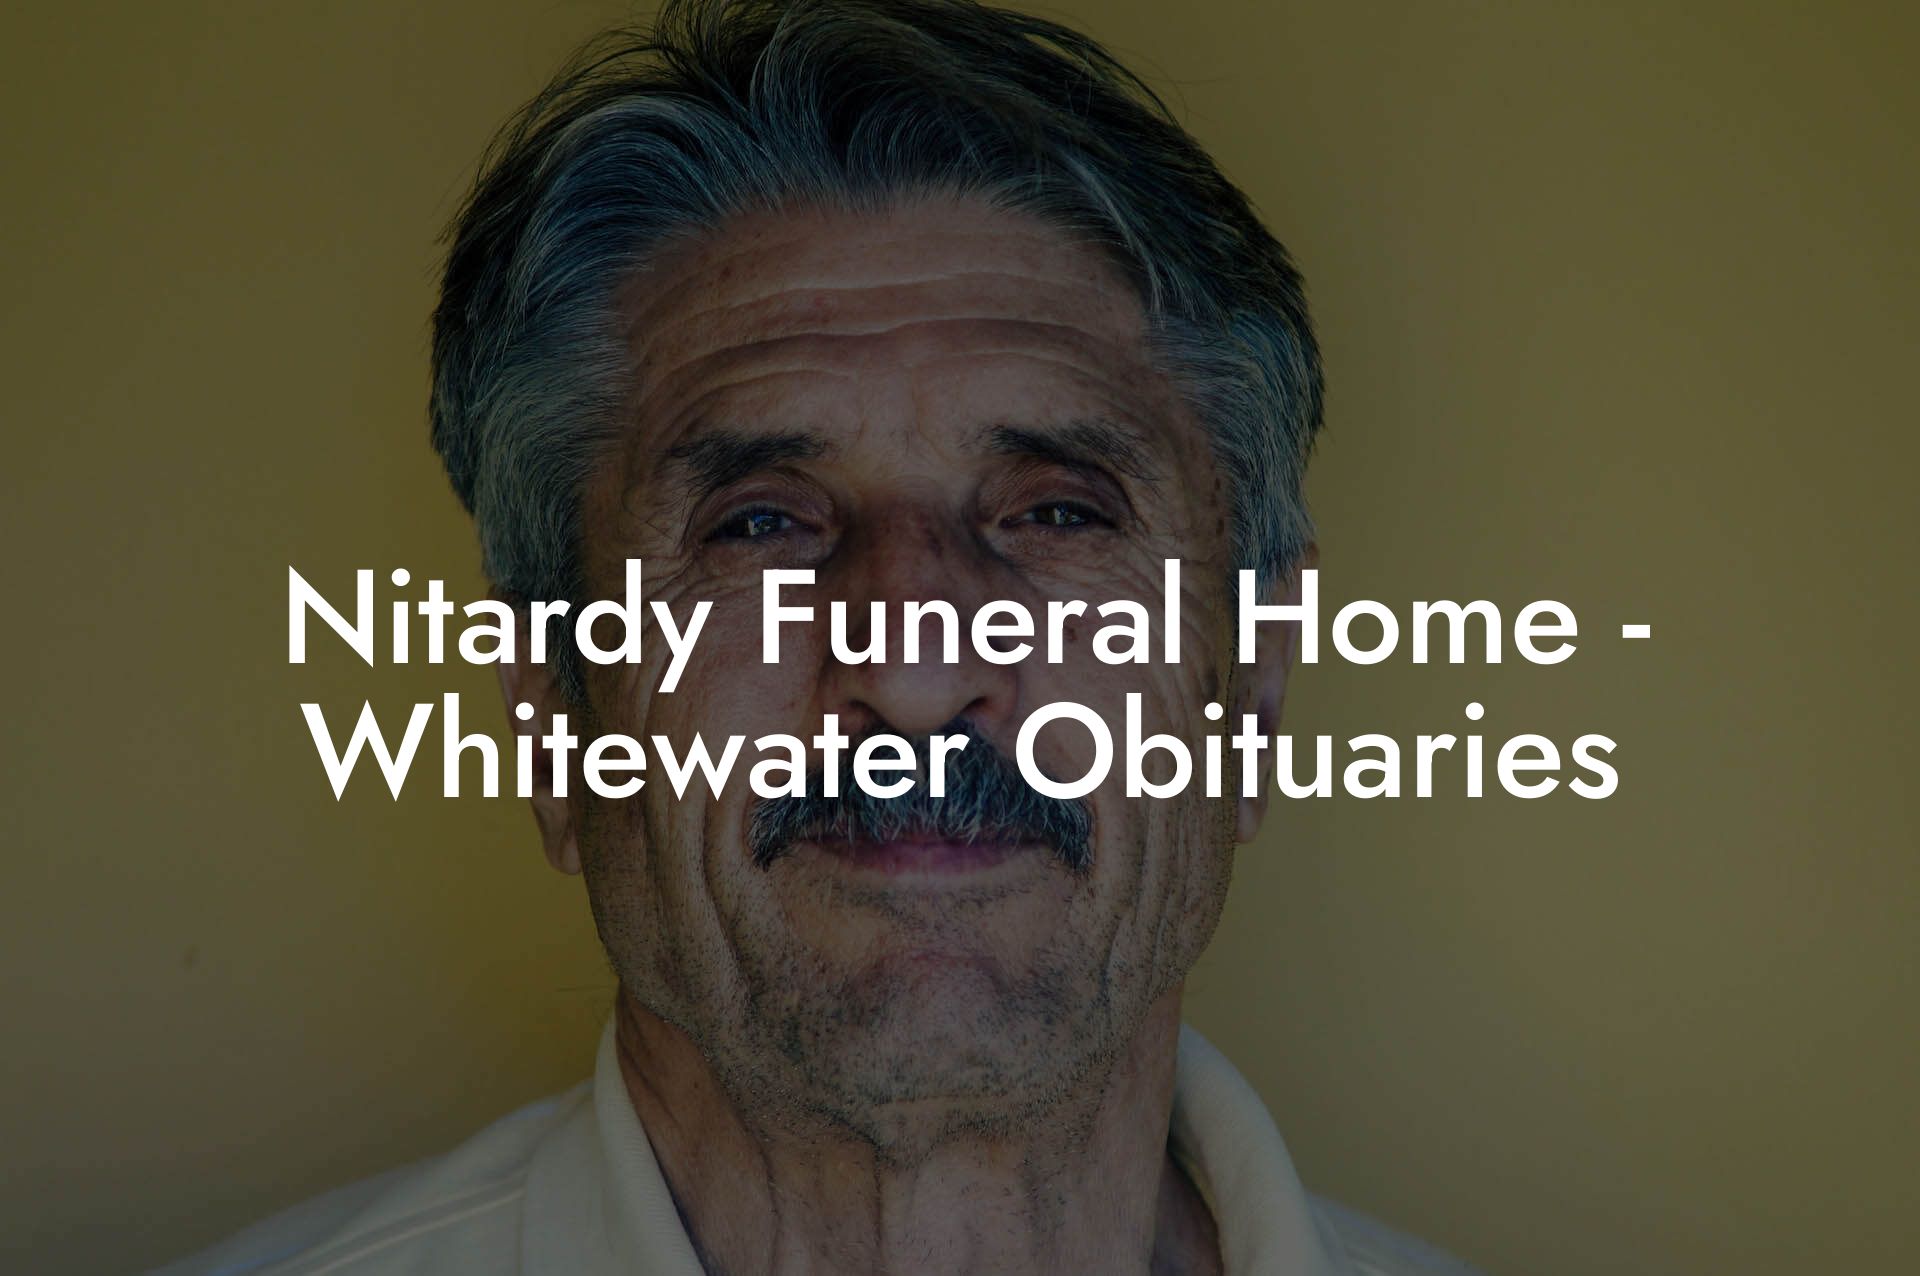 Nitardy Funeral Home - Whitewater Obituaries